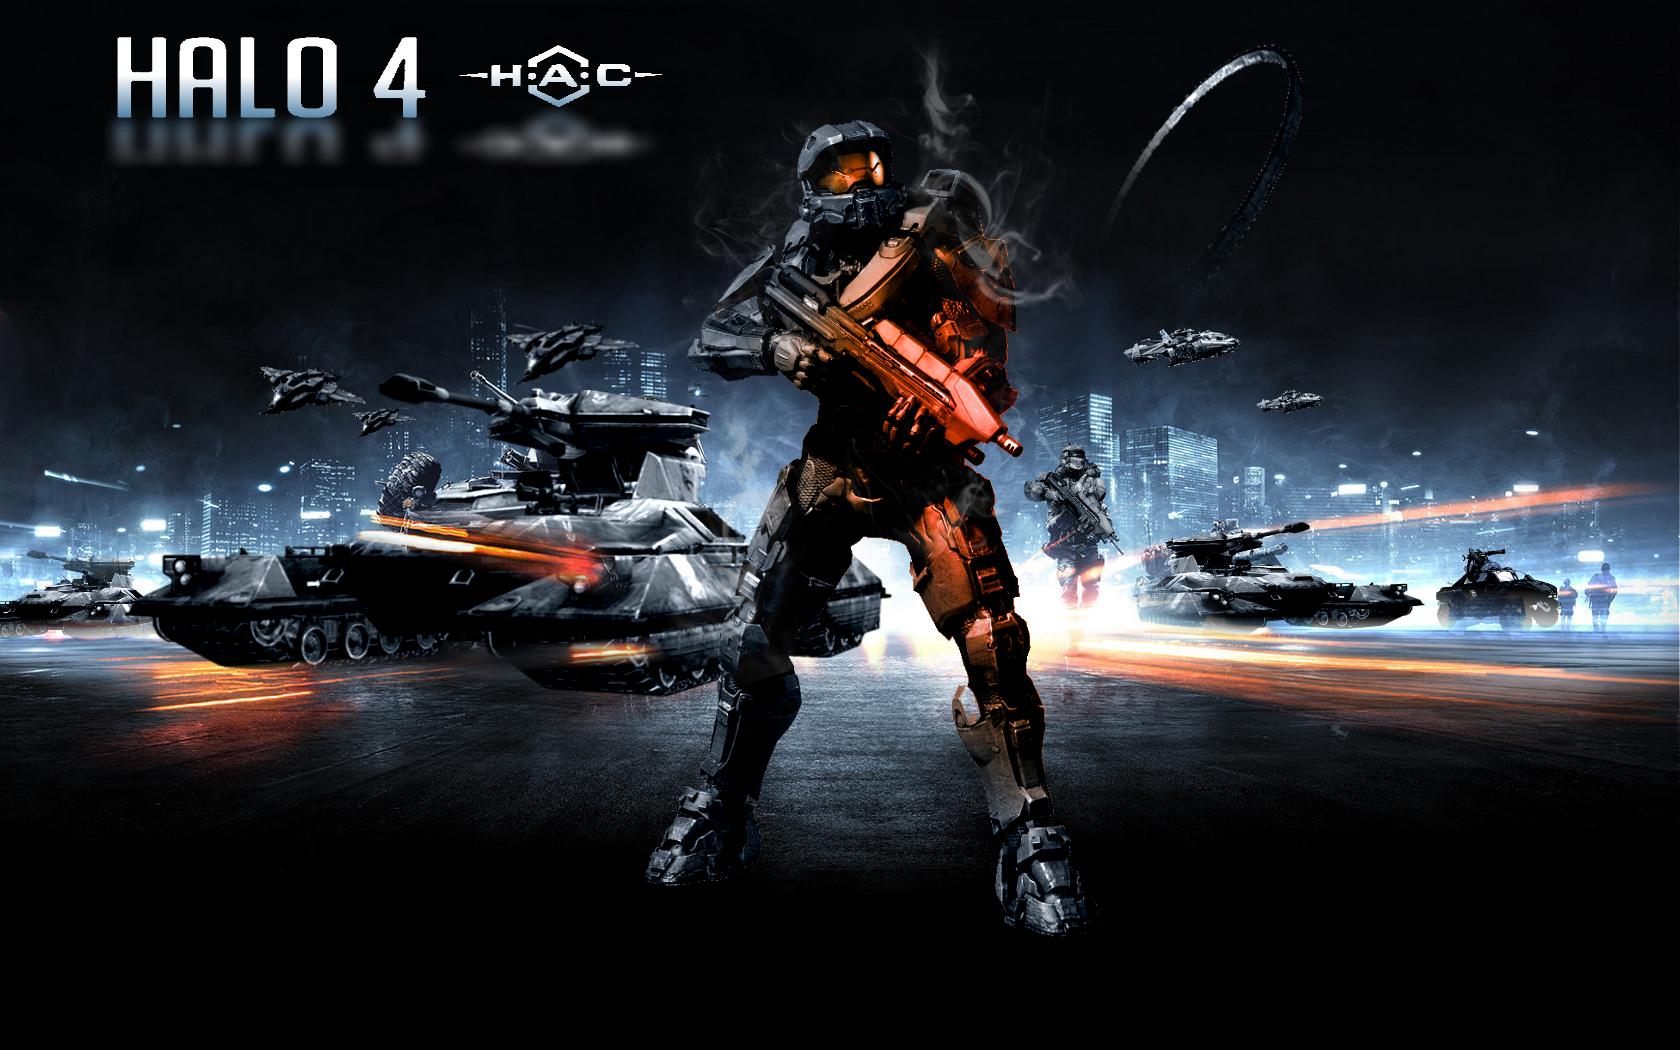 Halo 4 Wallpaper 4233 Hd Wallpapers in Games   Imagesci